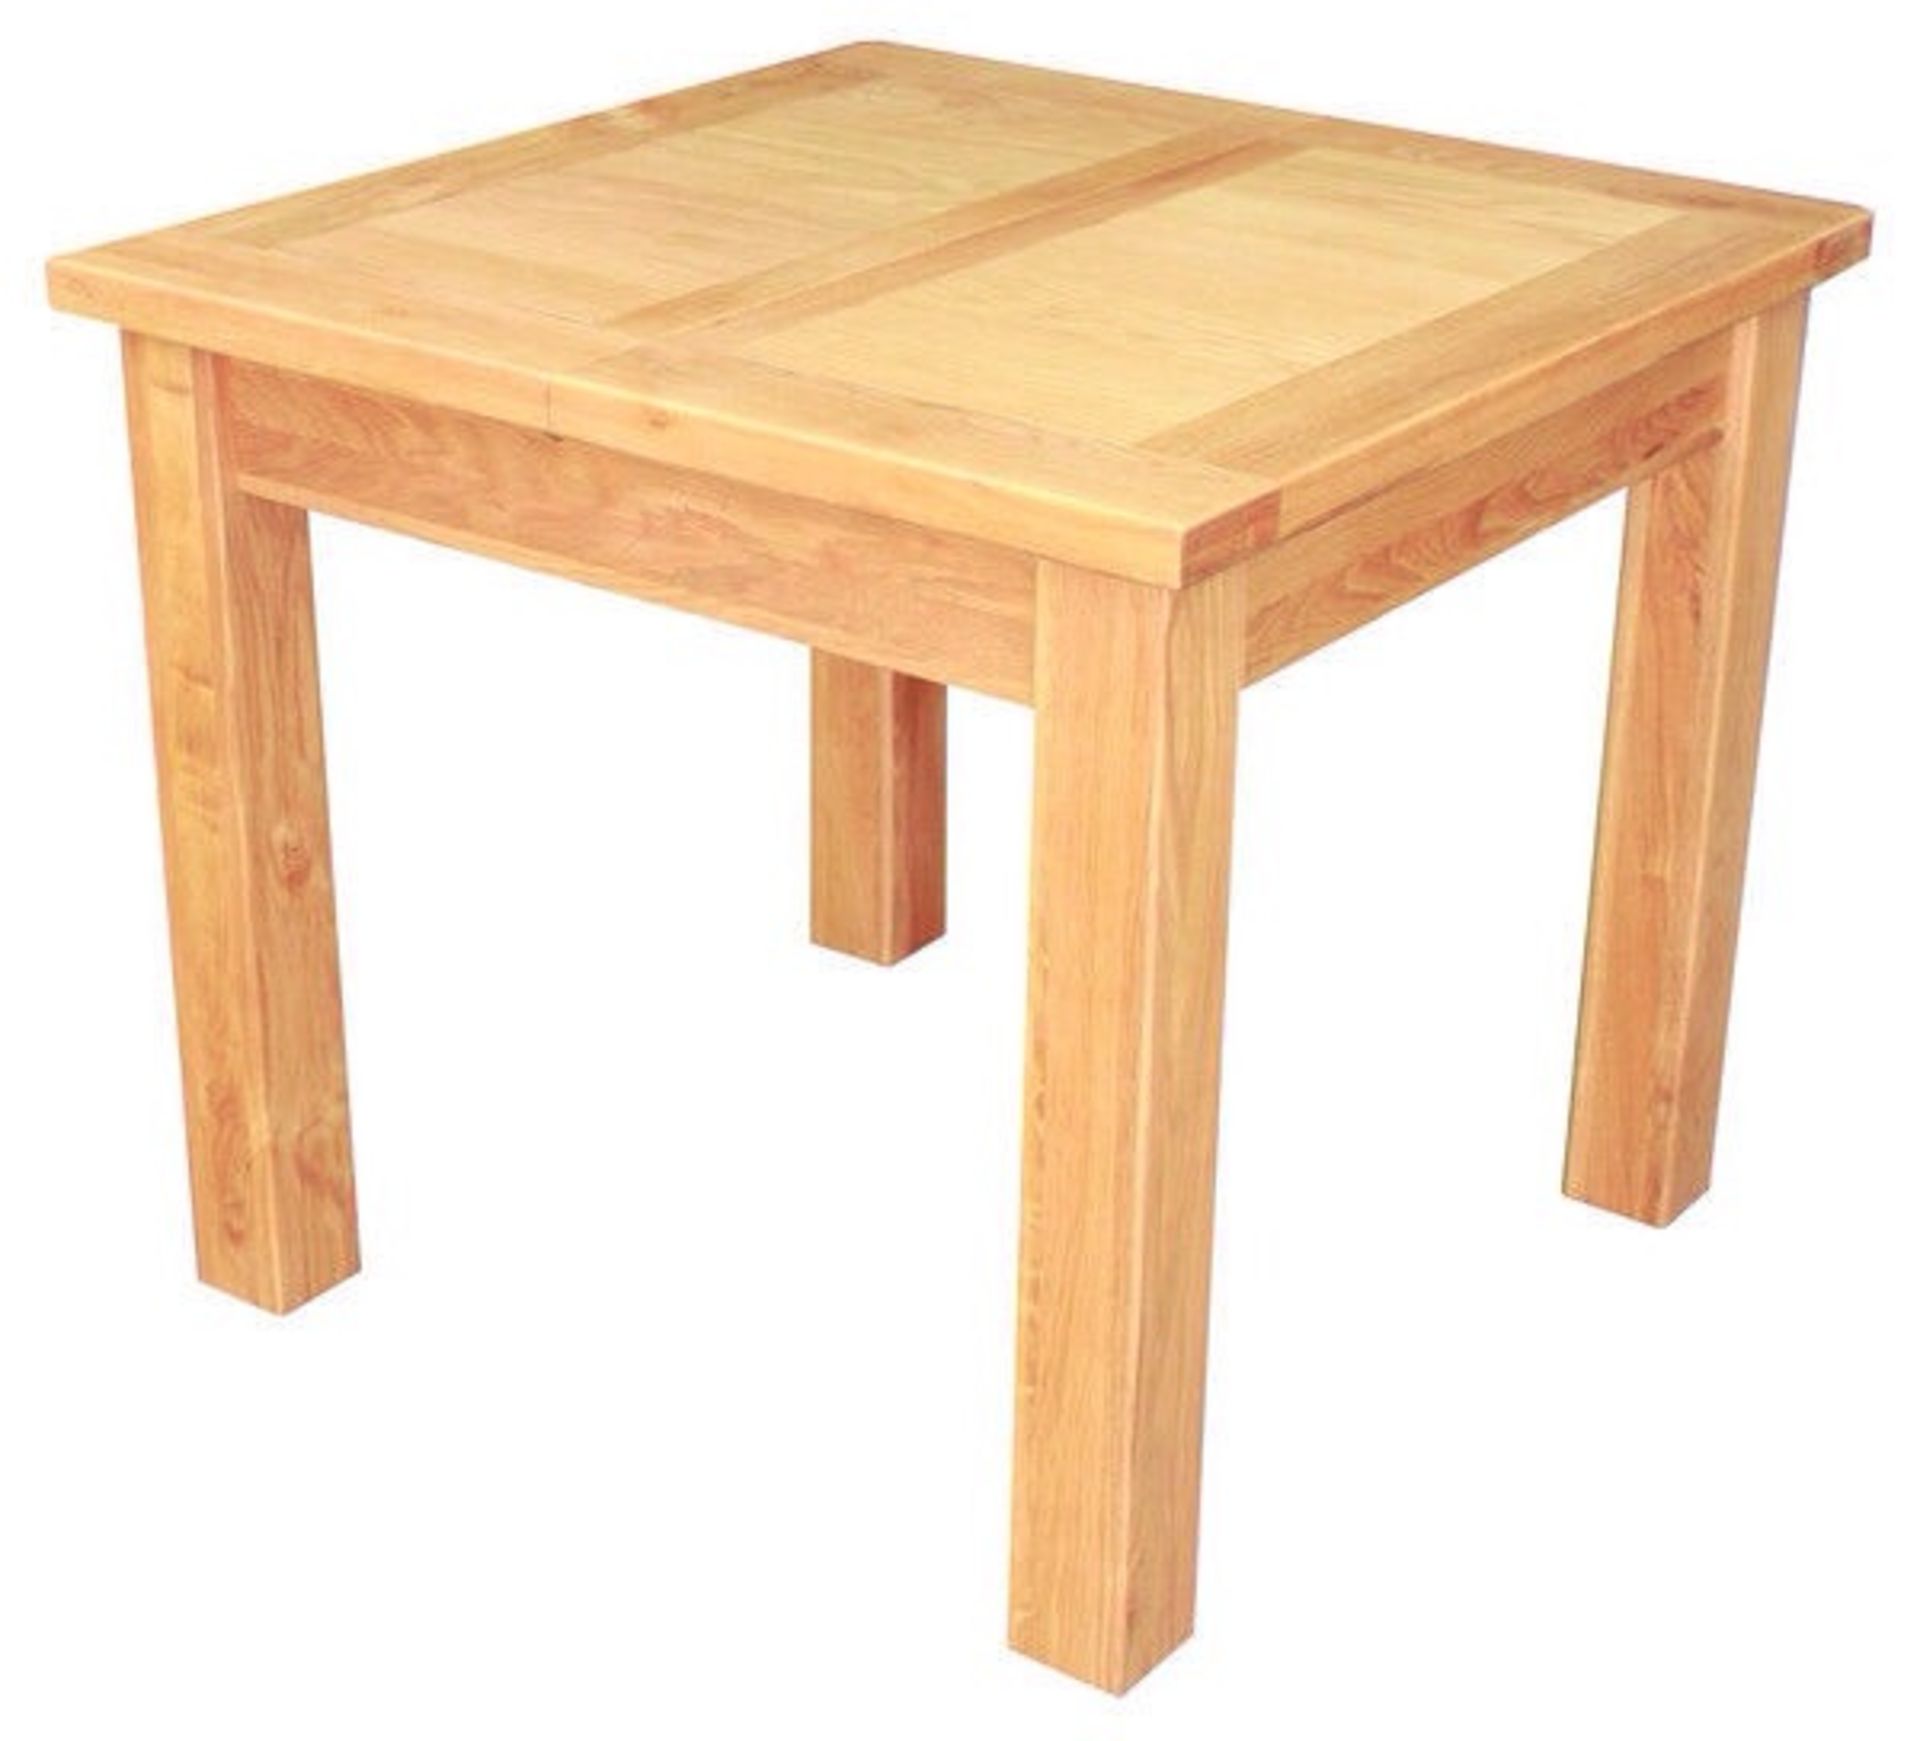 Solid Oak Topped Dining Table - Image 2 of 2